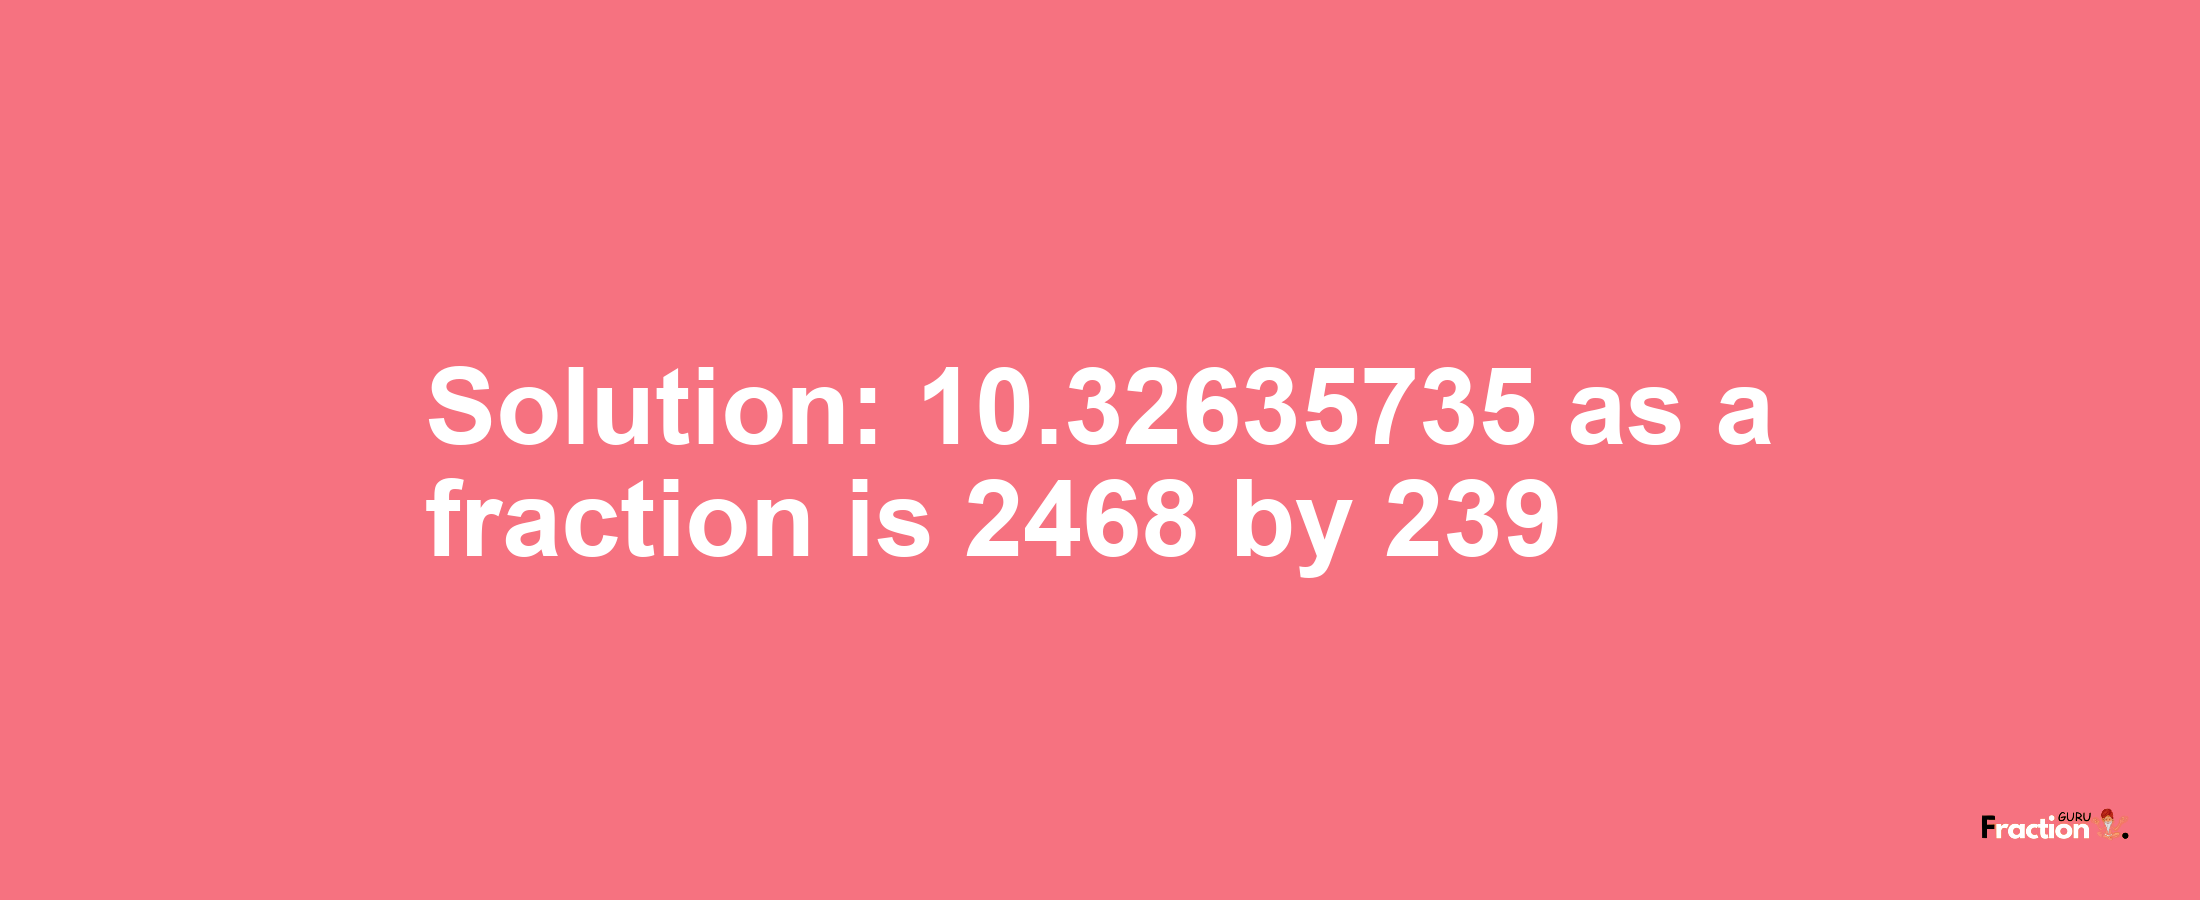 Solution:10.32635735 as a fraction is 2468/239